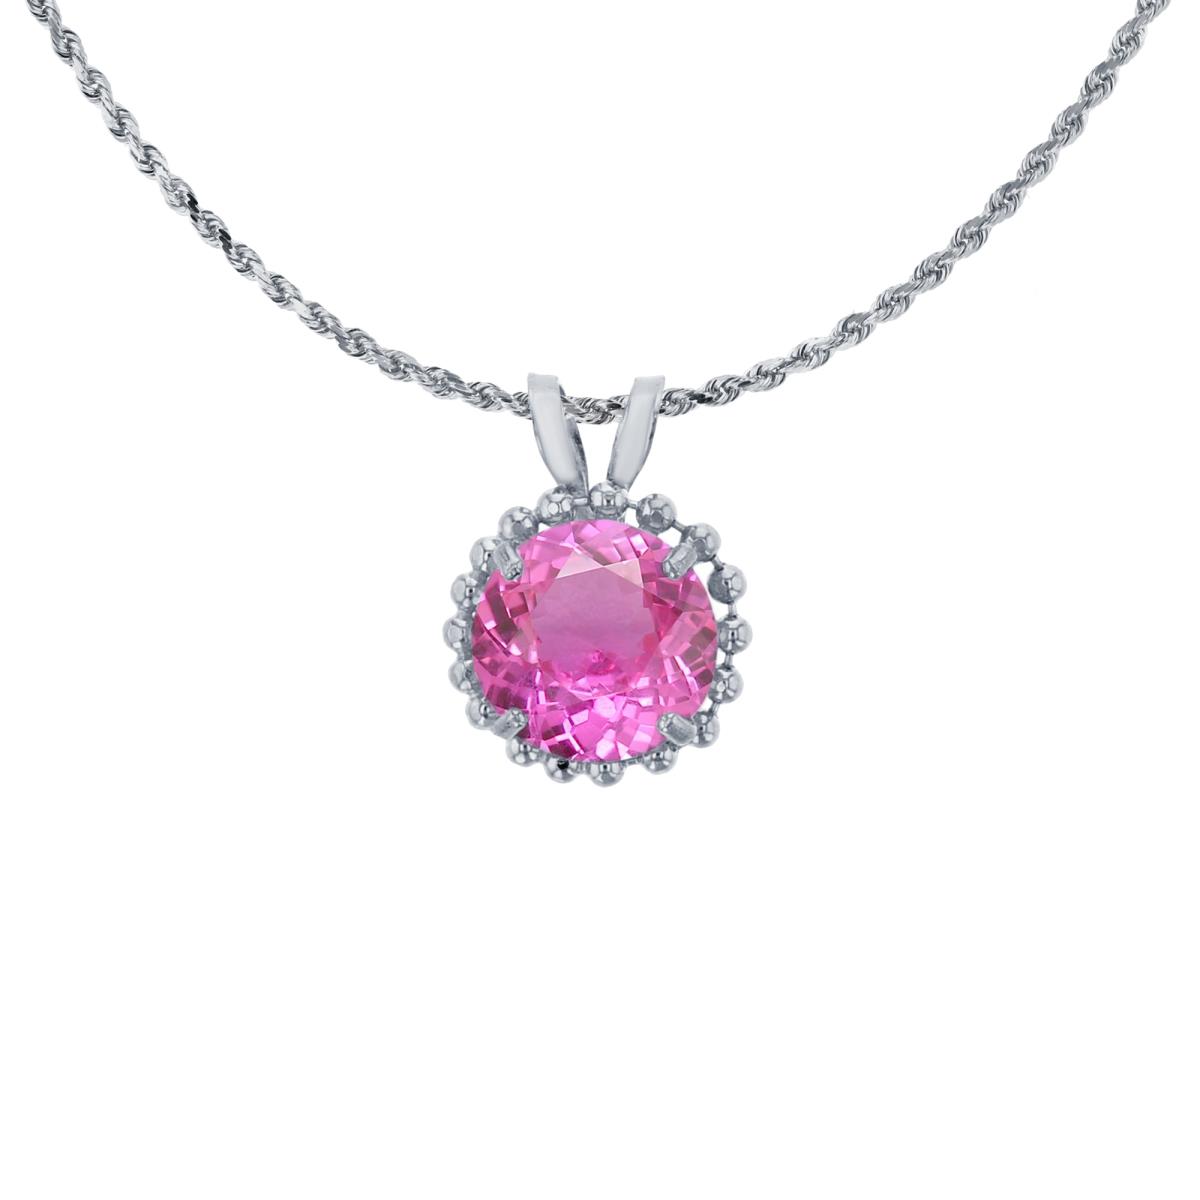 10K White Gold 6mm Rd Cut Created Pink Sapphire with Bead Frame Rabbit Ear 18" Necklace